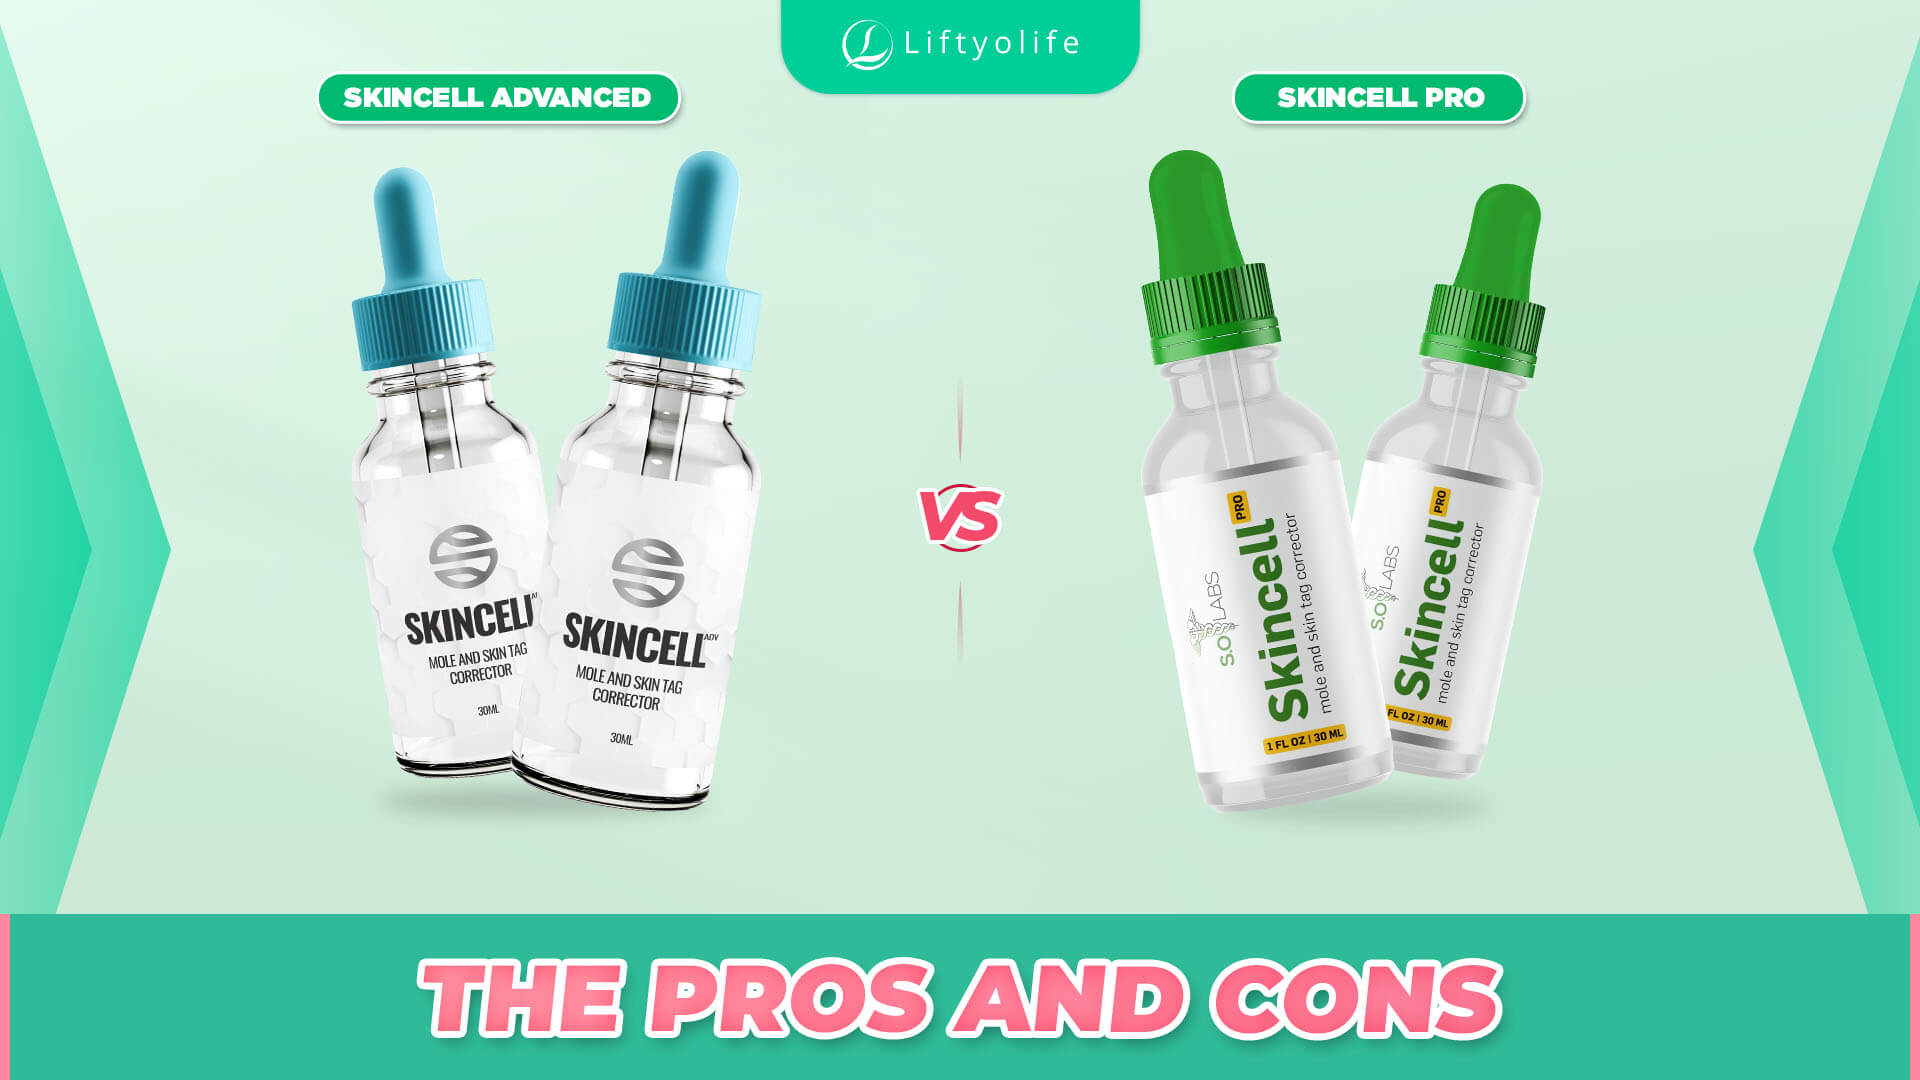 Skincell Advanced Vs Skincell Pro: The Pros And Cons